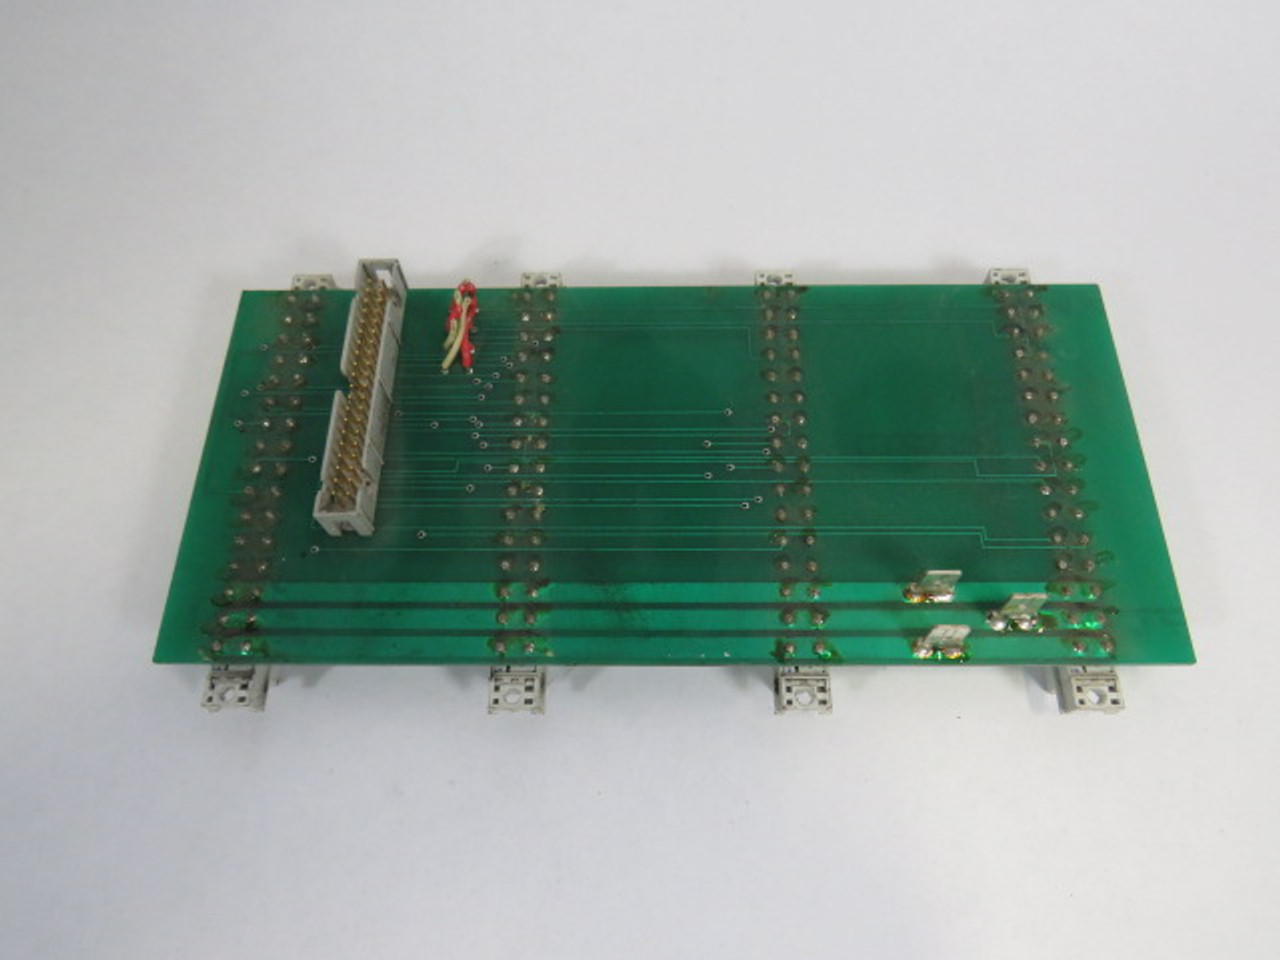 Schroff 69001-691 4-Slot Connector Board USED